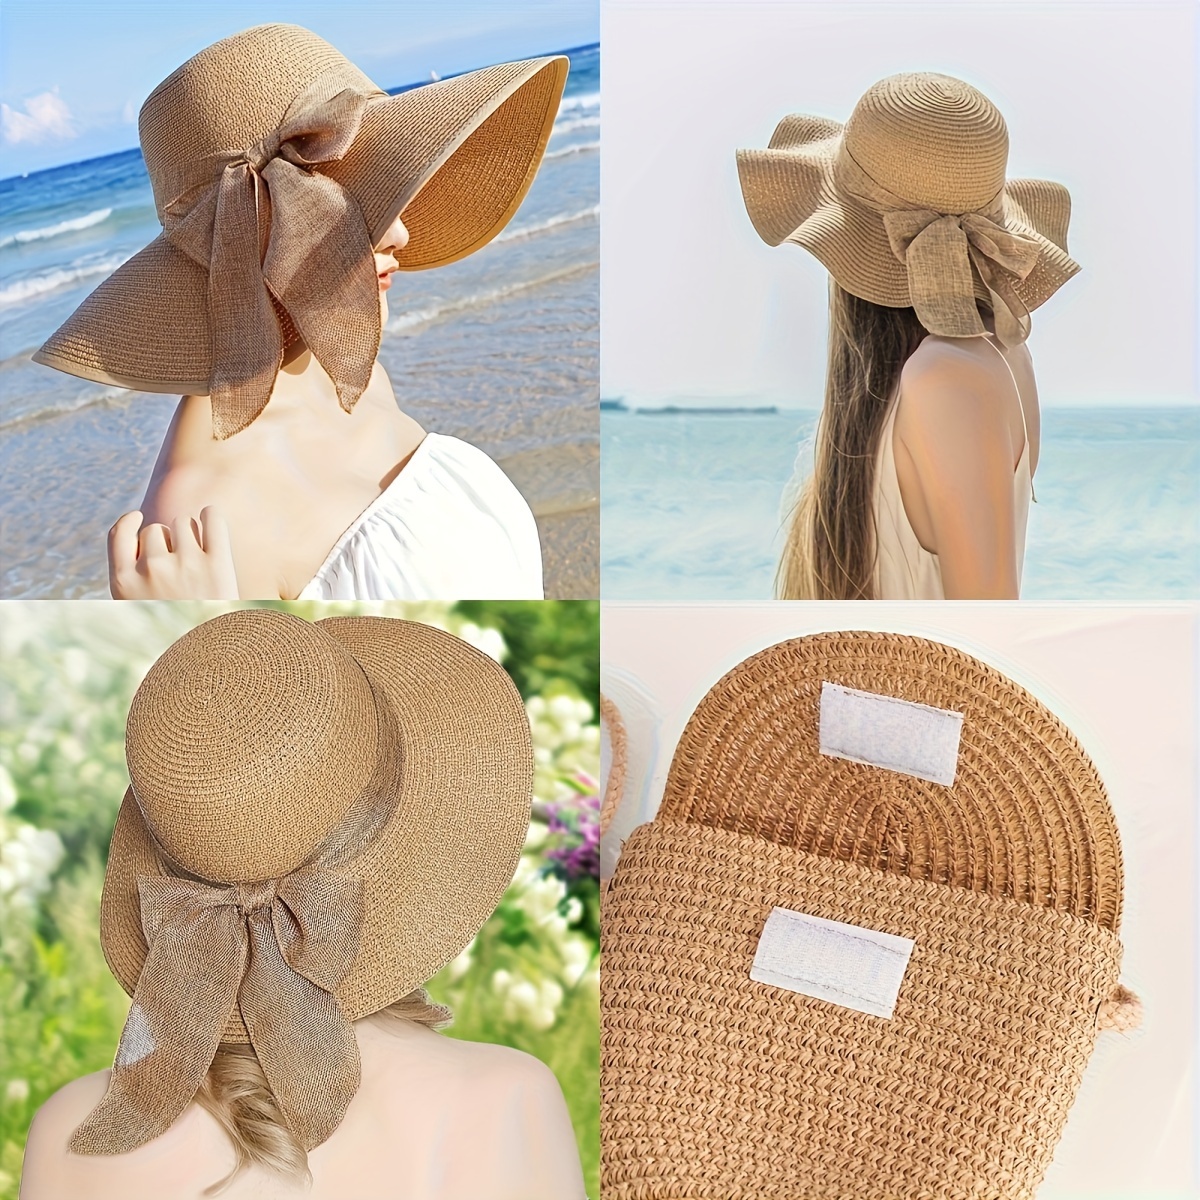 

2 Piece/set Women's Beach Hat Women's Wave Beach Sun Hat And Woven Shoulder Bag Combination, Perfect For Spring/summer Beach Vacations And Outdoors